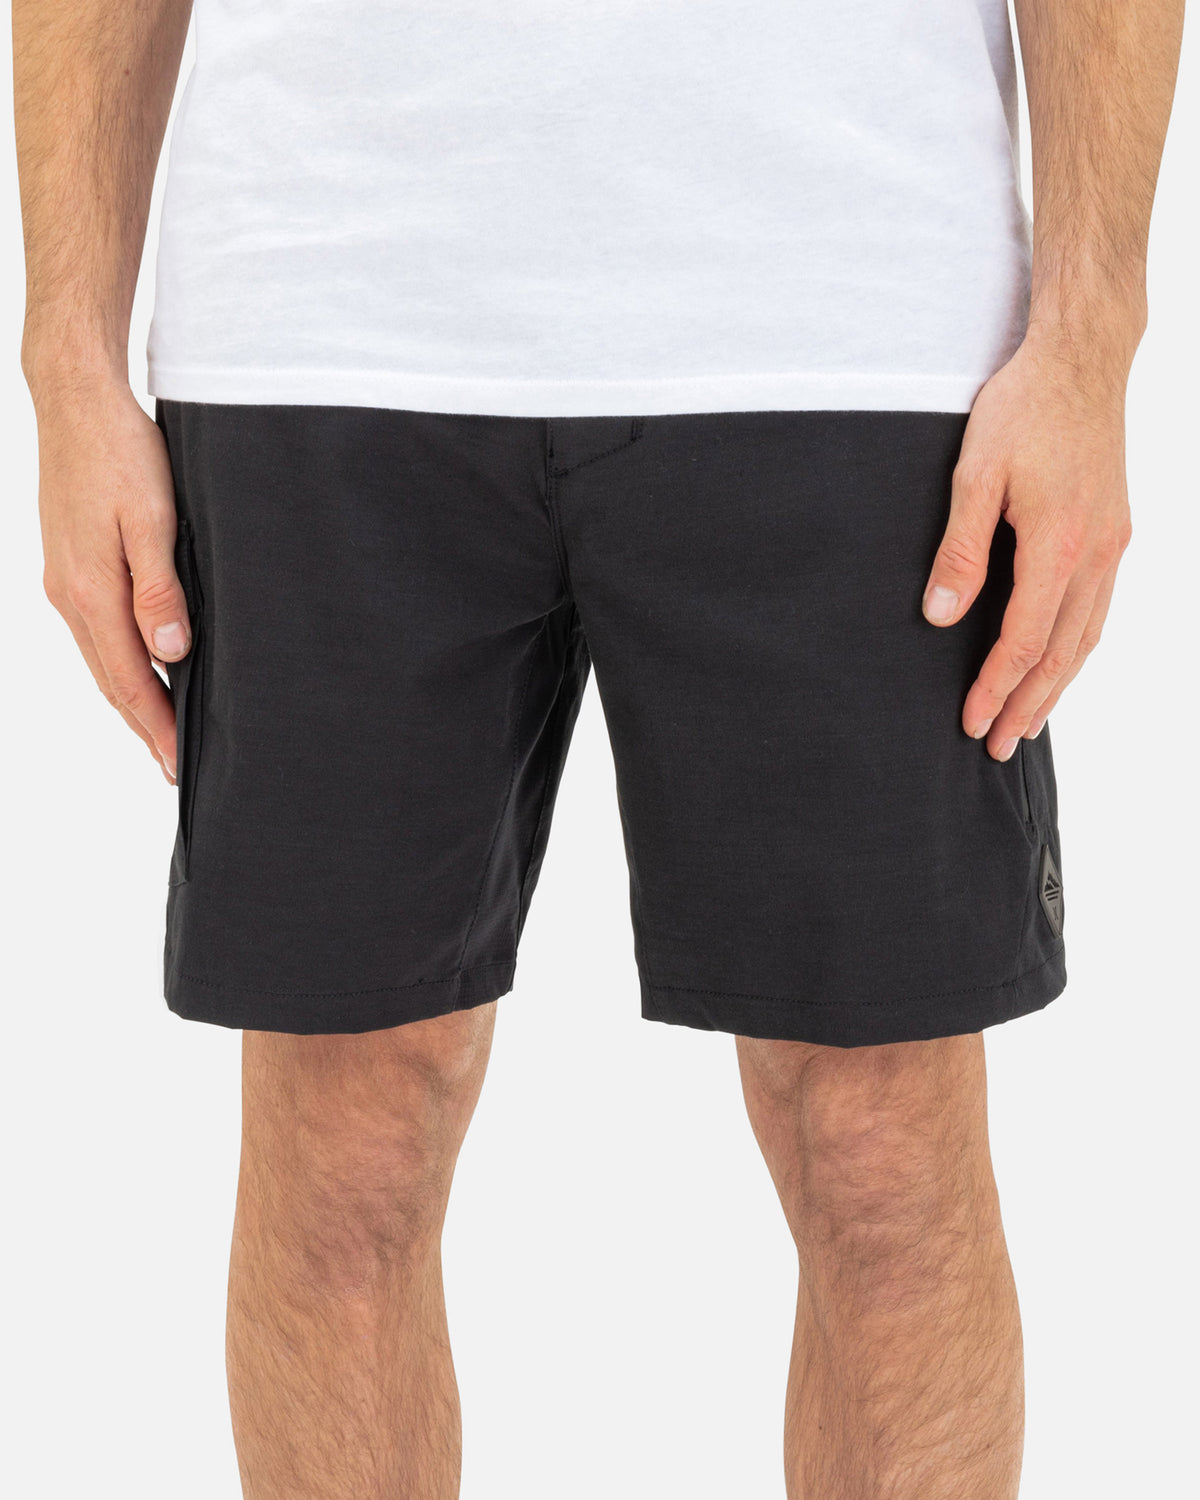 NOMAD SHORTS VOLLEY - CHARCOAL CAMO